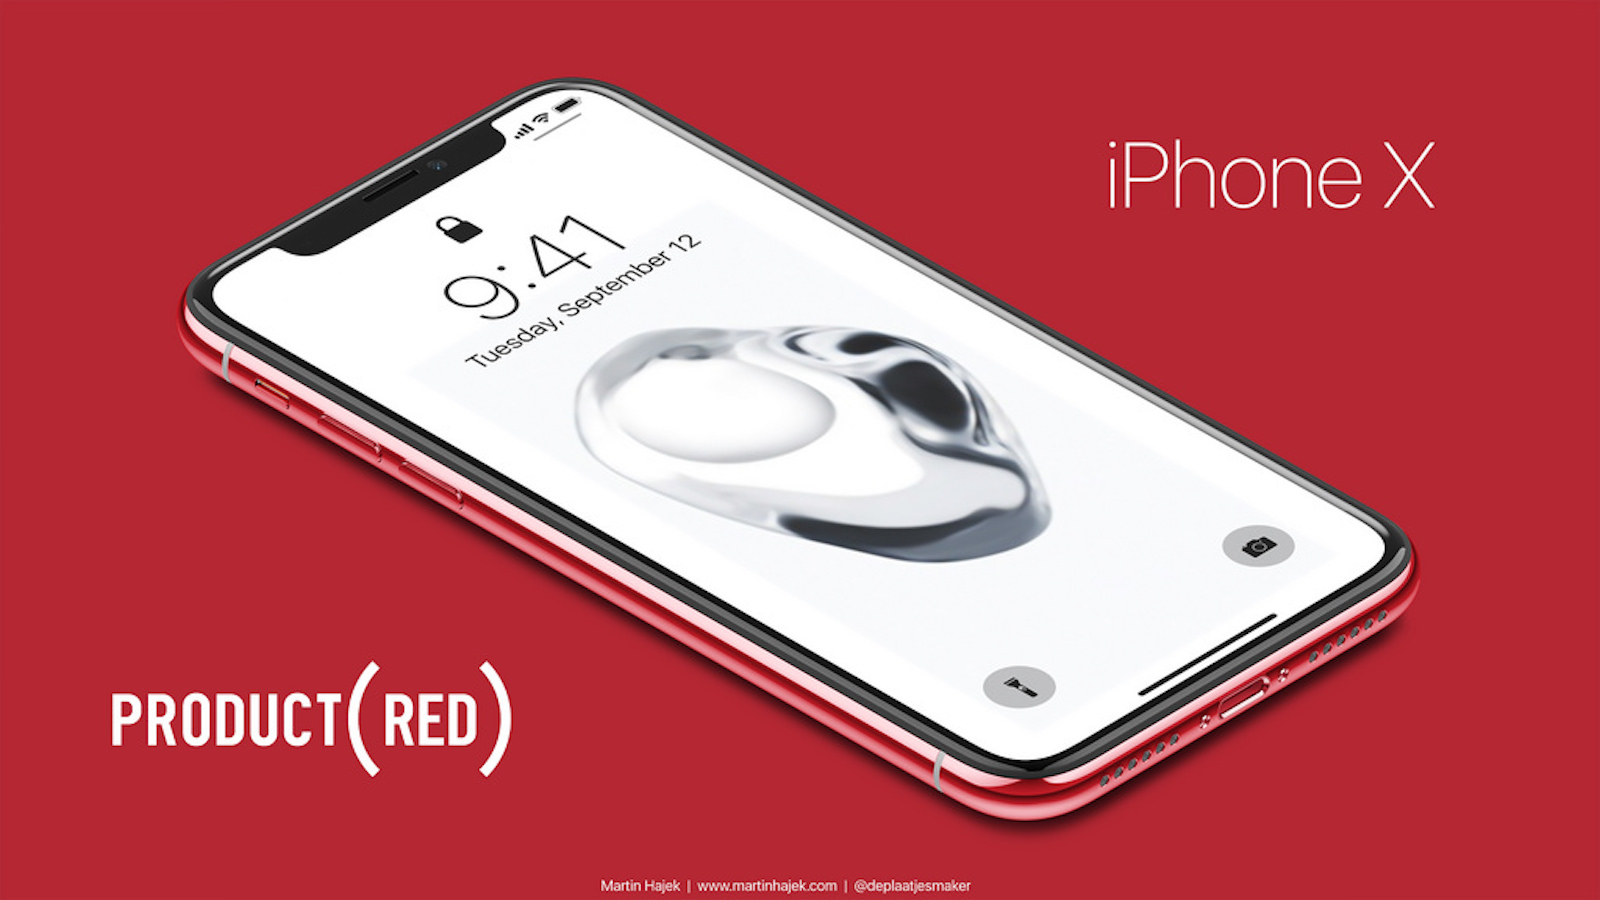 iphone-x-product-red-image.jpg